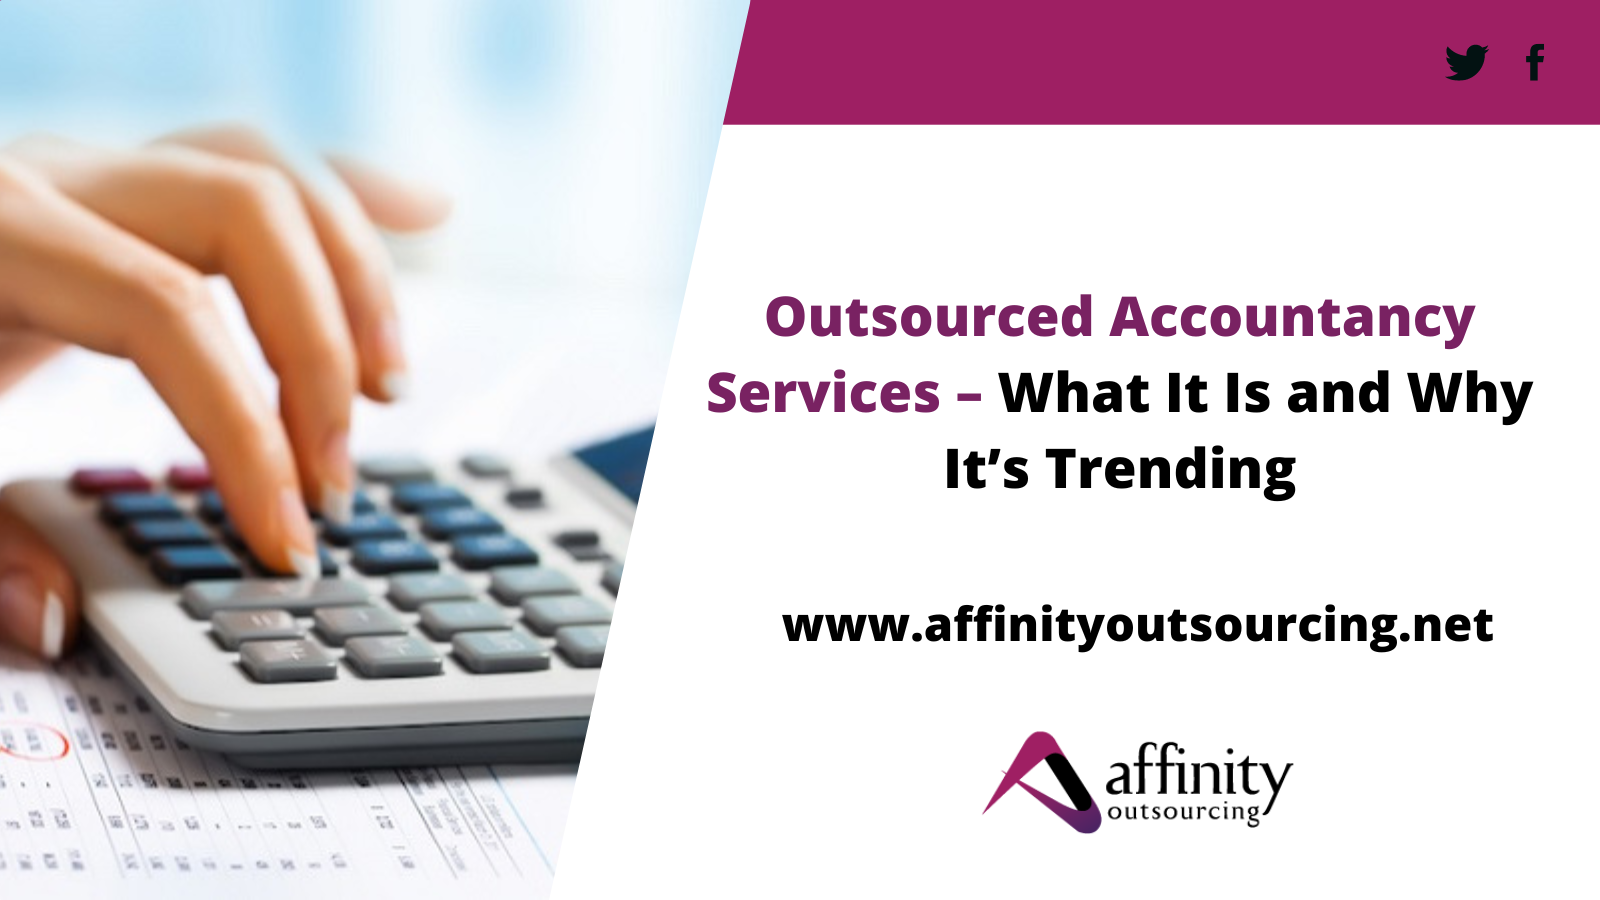 Outsourced Accountancy Services – What It Is and Why It’s Trending